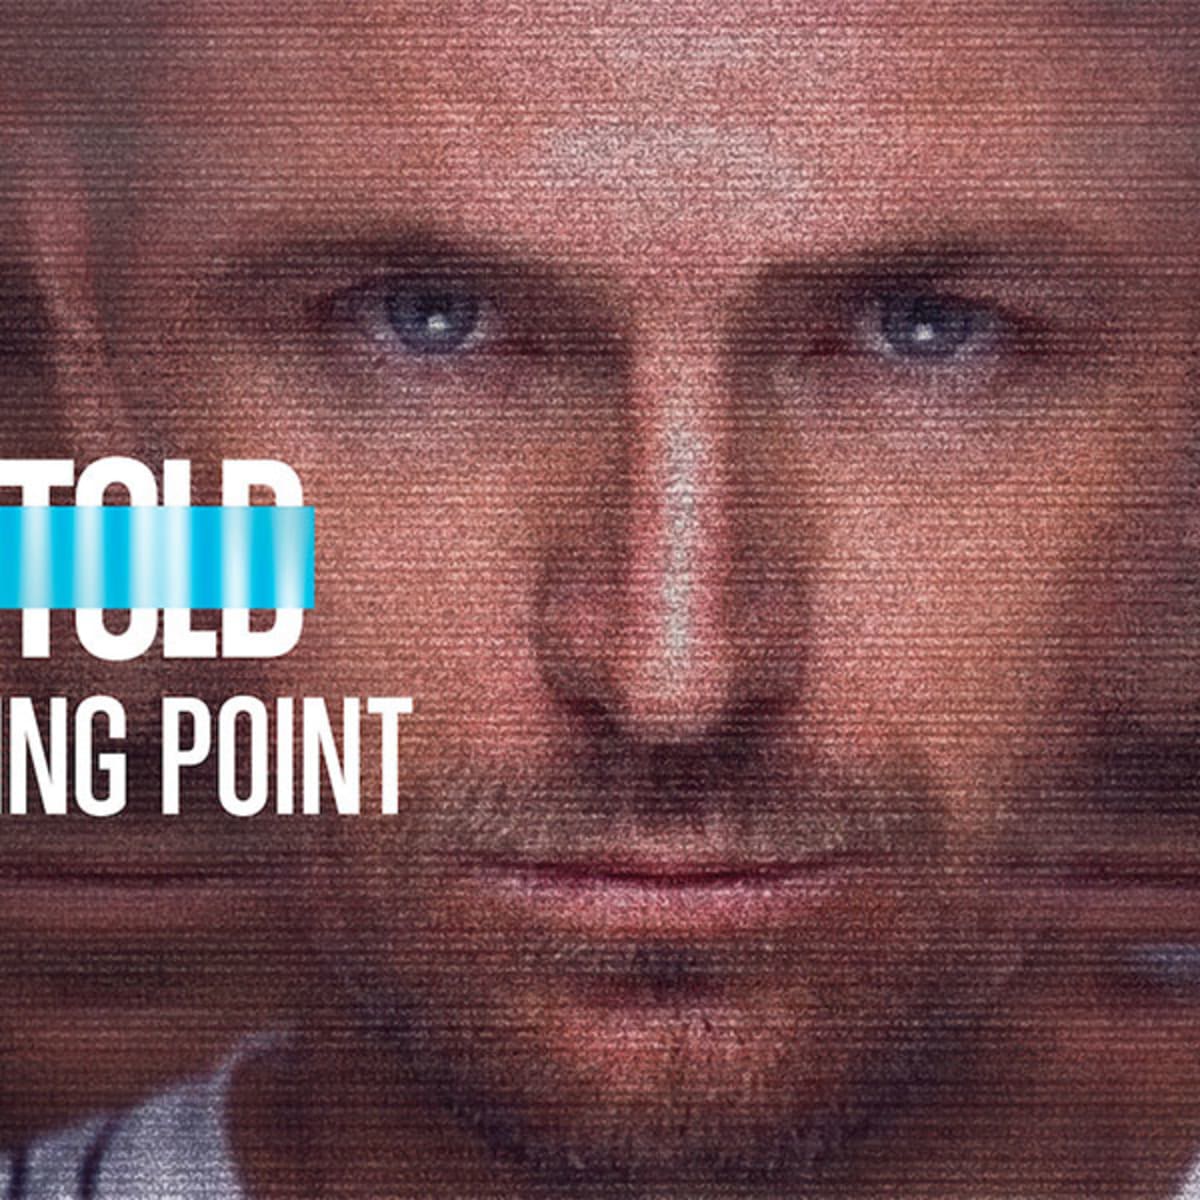 Review: Mardy Fish's Untold: Breaking Point a must-watch story at